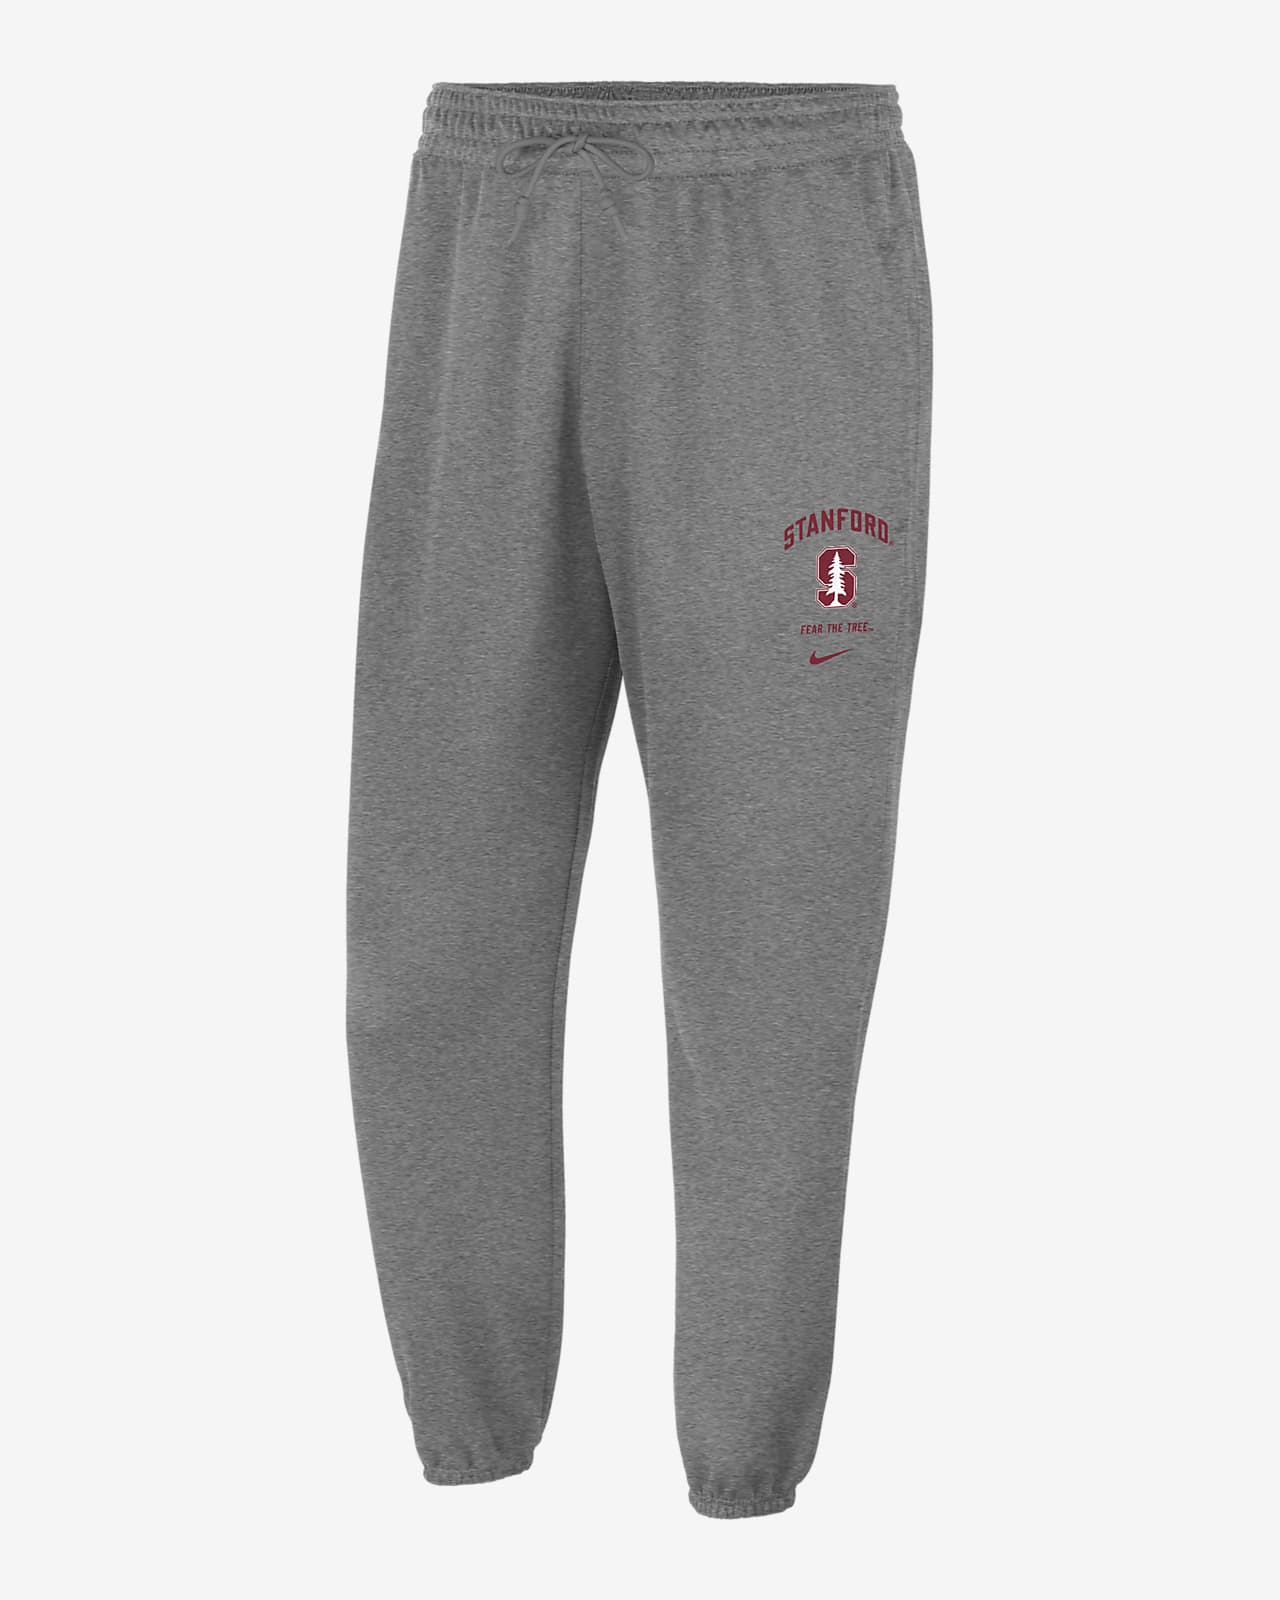 Joggers universitarios Nike para hombre Stanford Standard Issue